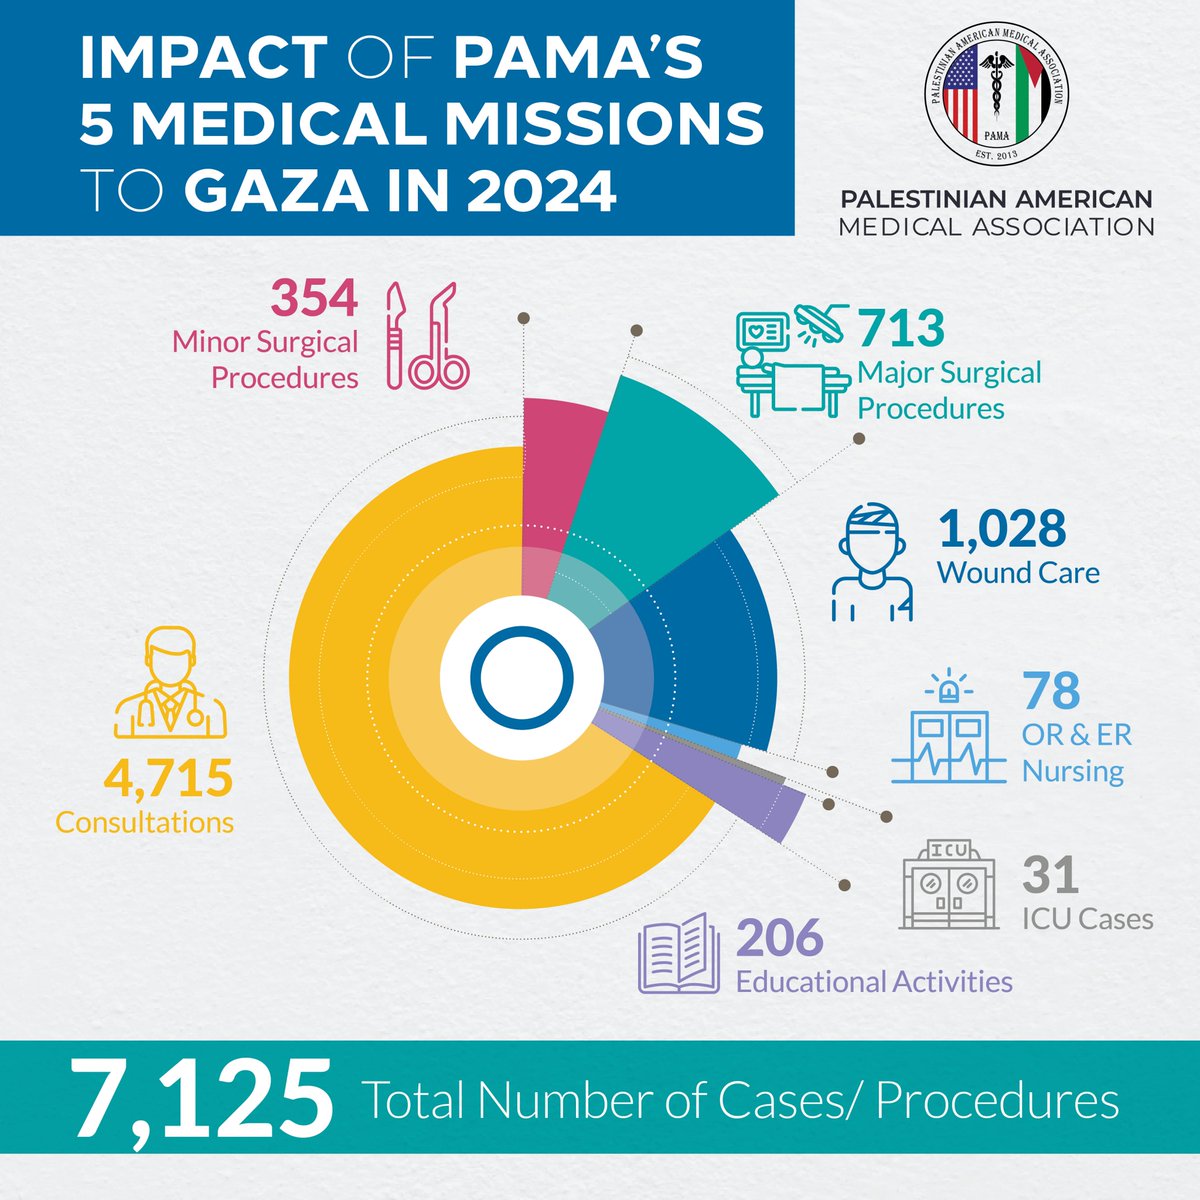 PAMA medical mission team in the U.S. has been working diligently to plan and send five medical missions to Gaza in 2024 alone. This infographic will showcase the results of these missions and the impact they made for the people of Gaza. PAMA continues to plans more medical